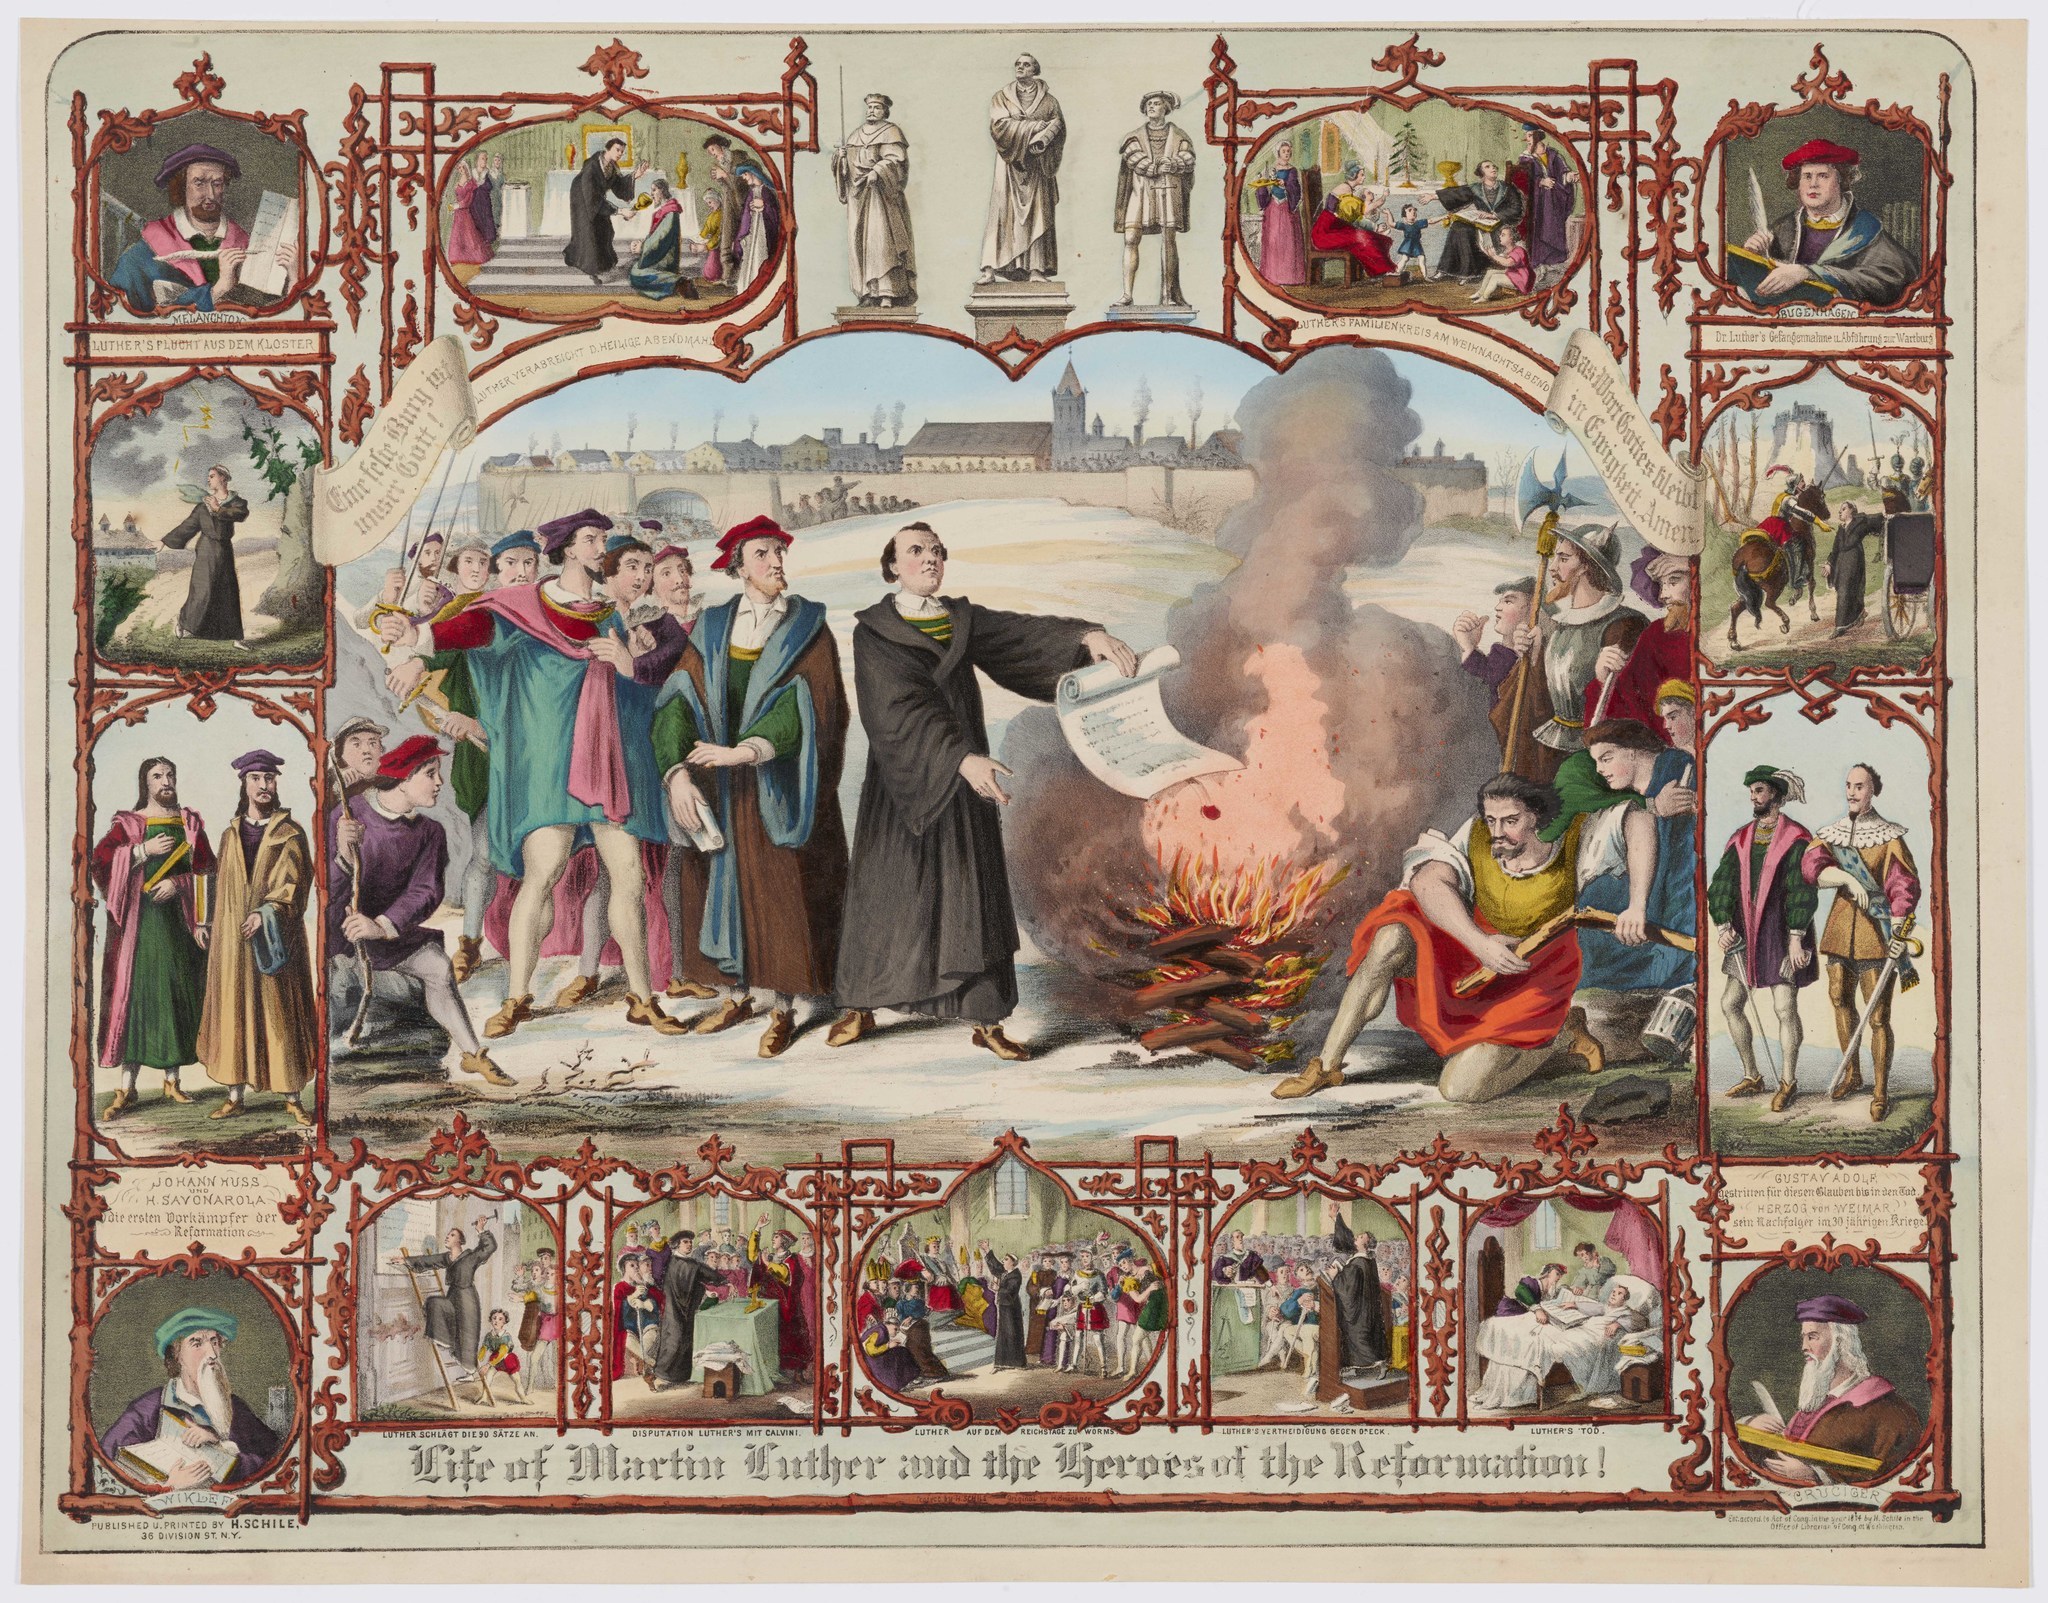 "Life of Martin Luther and the heroes of the Reformation," 1874, by H. Breul after H. Brückner.